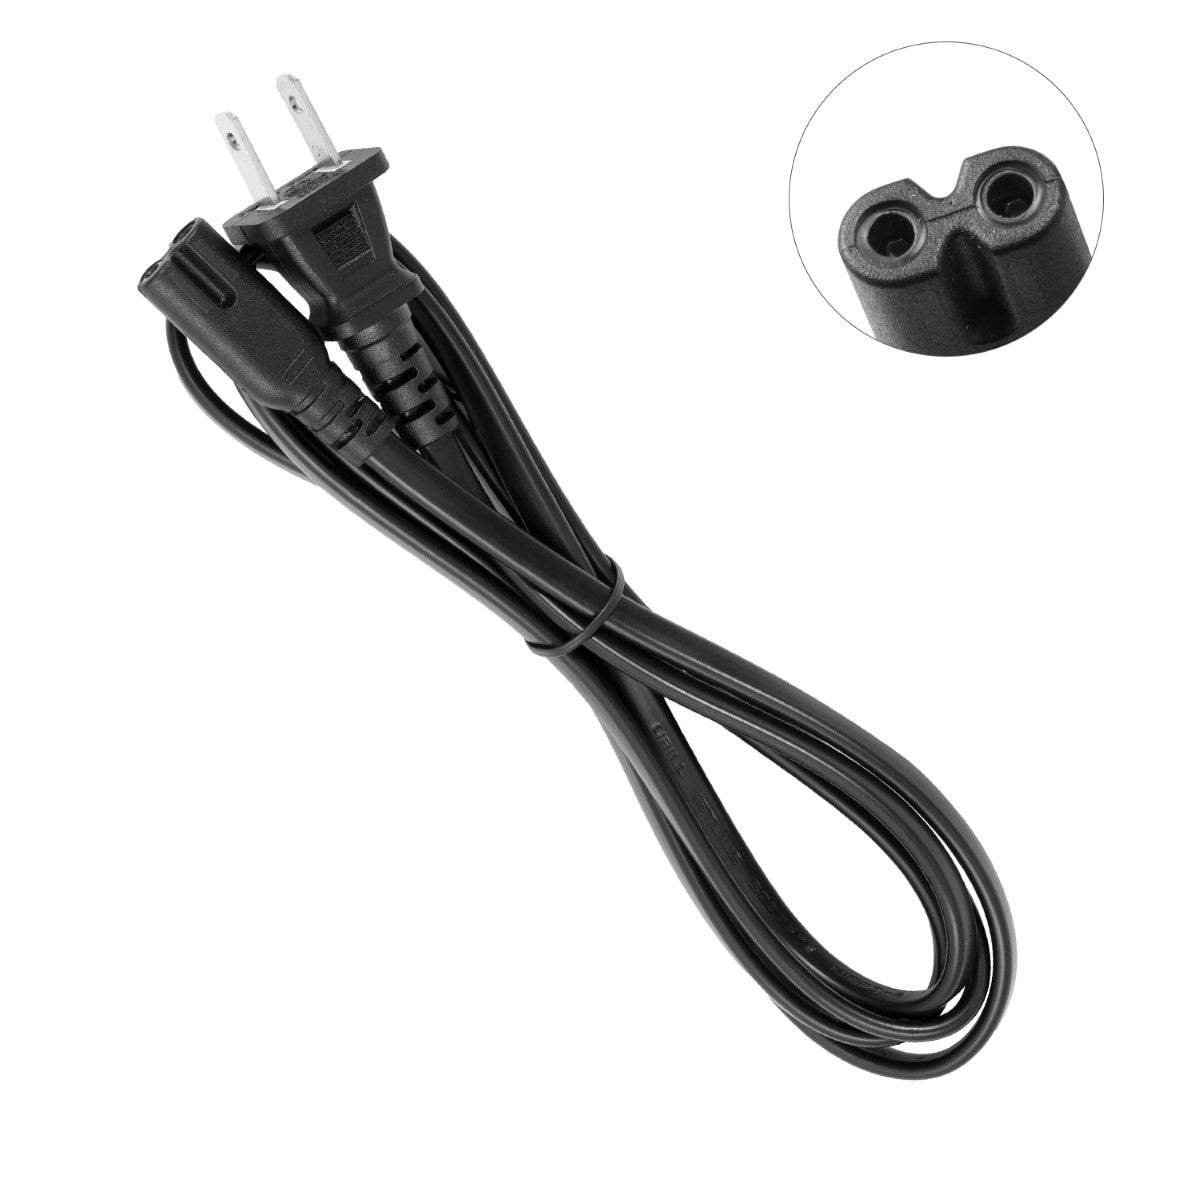 Power Cord for HP ENVY 5646 e-All-in-One Printer.